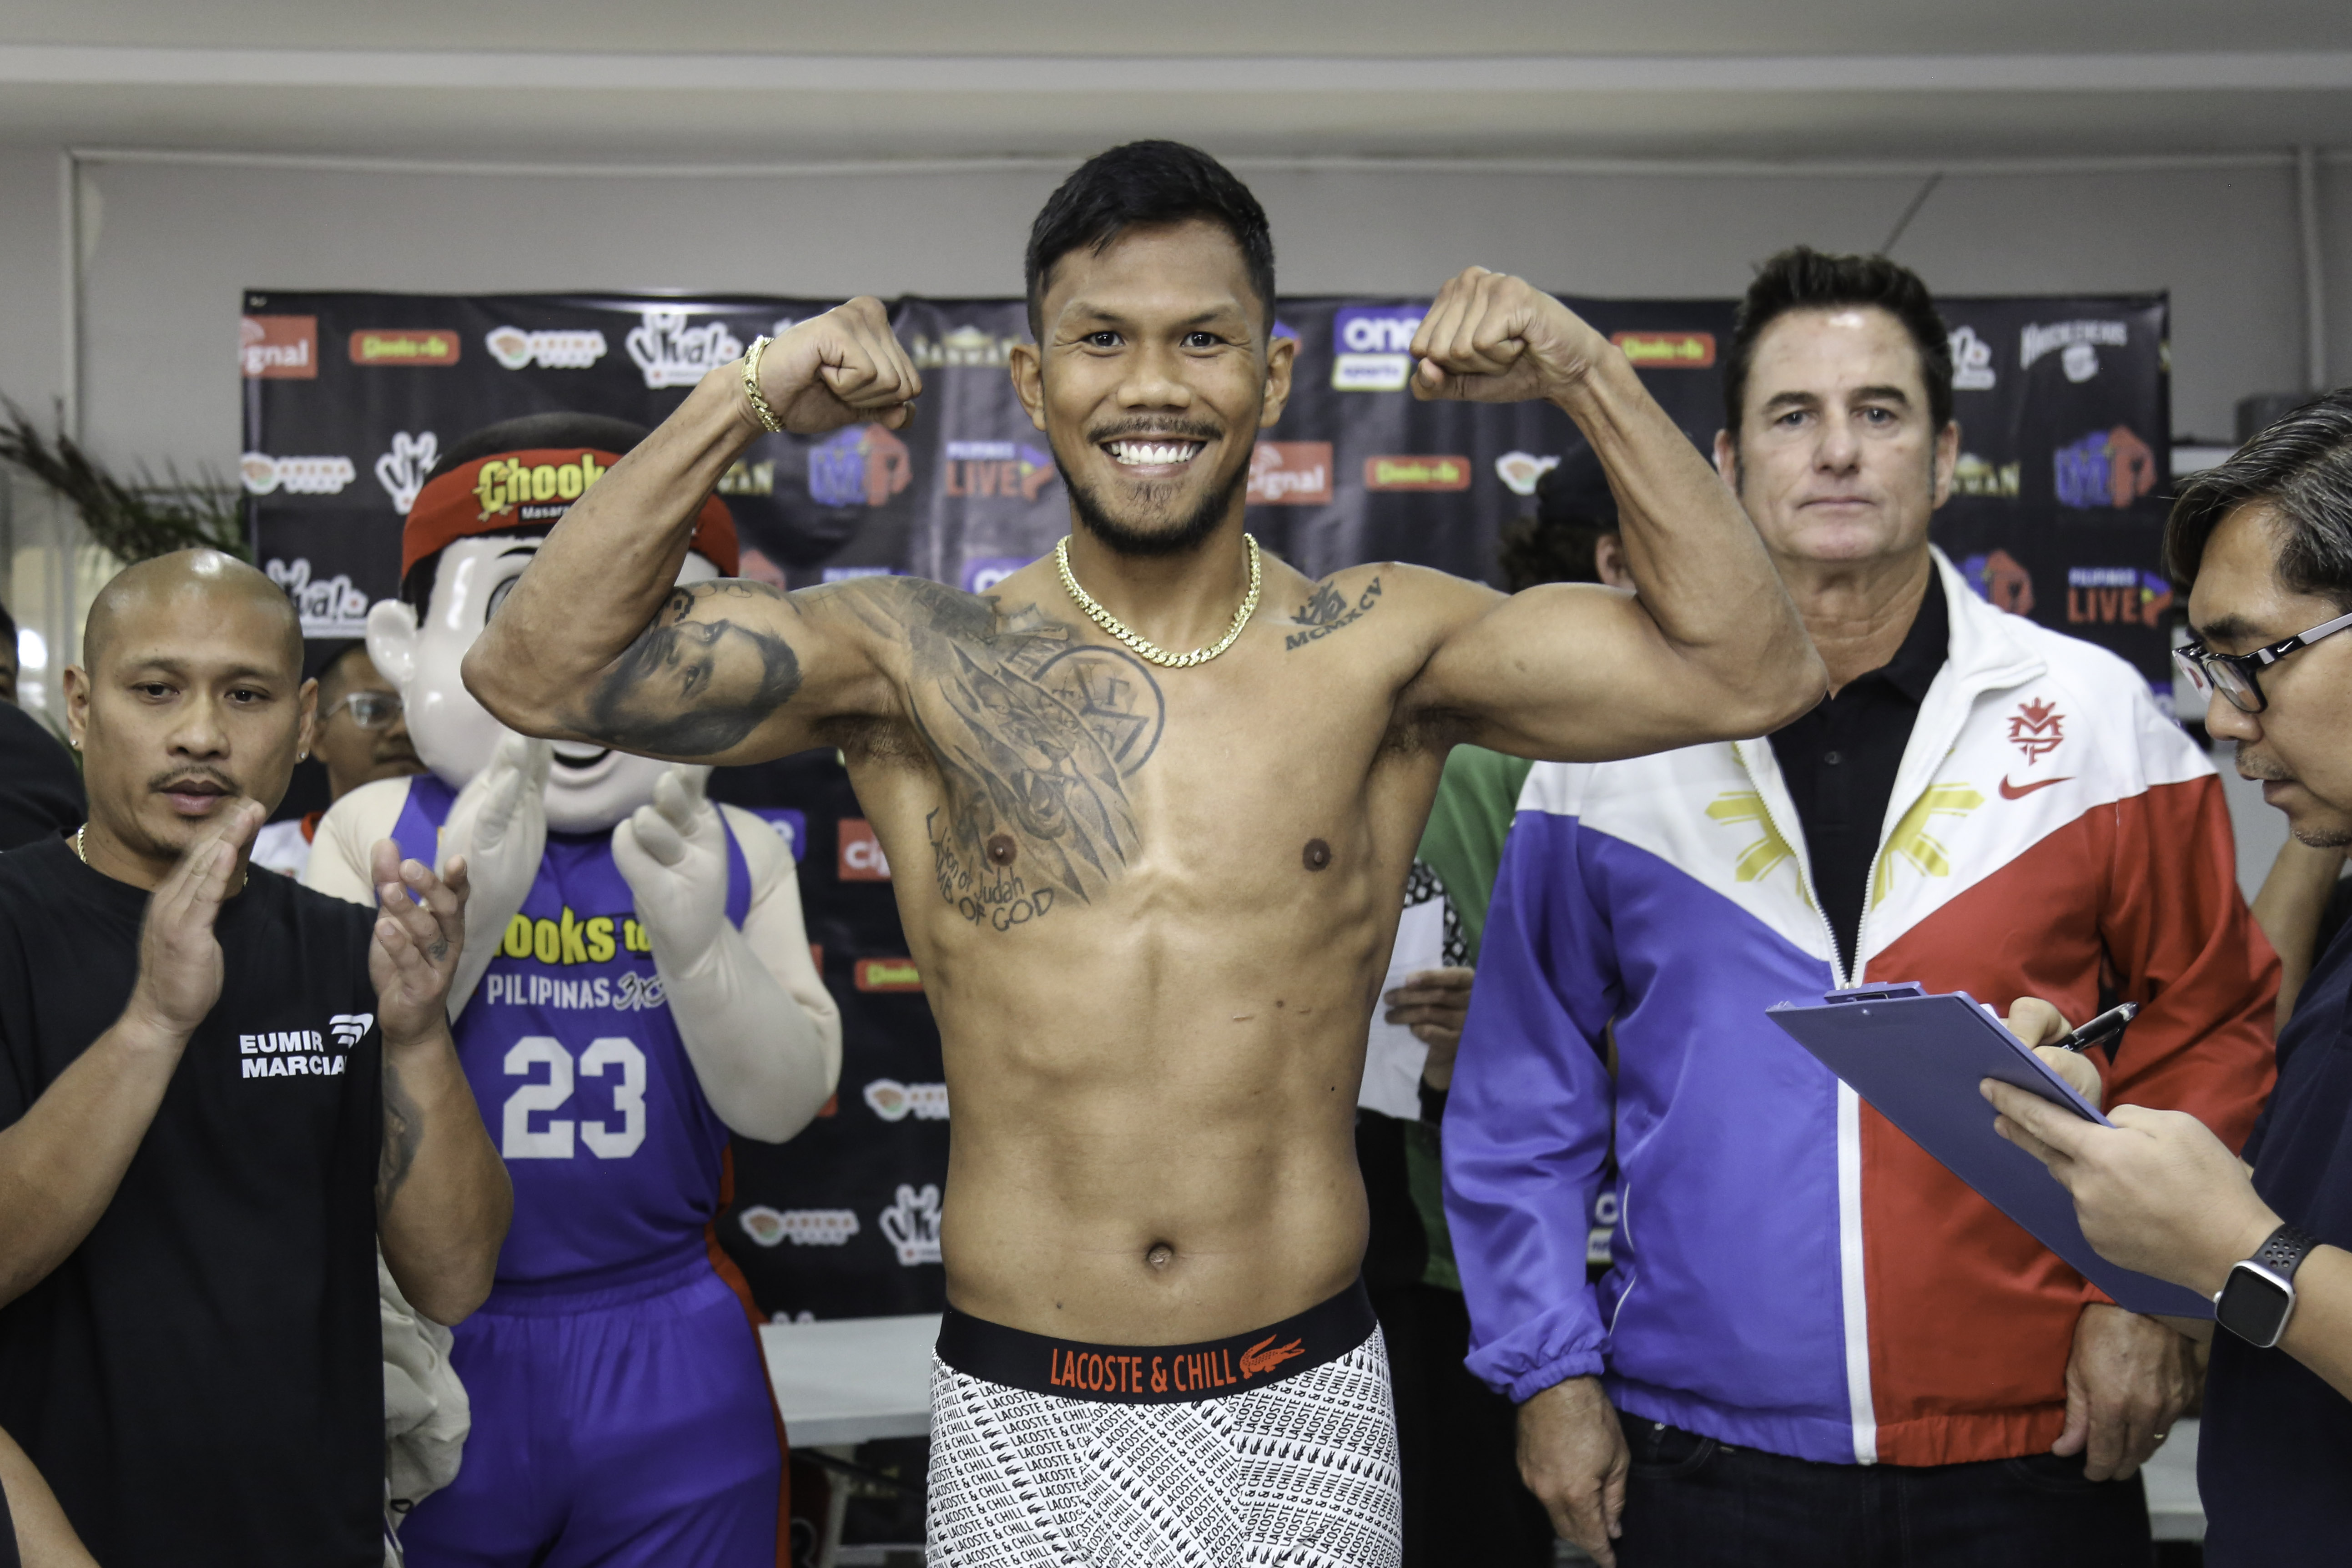 Eumir Marcial, Sinam make weight for upcoming fight